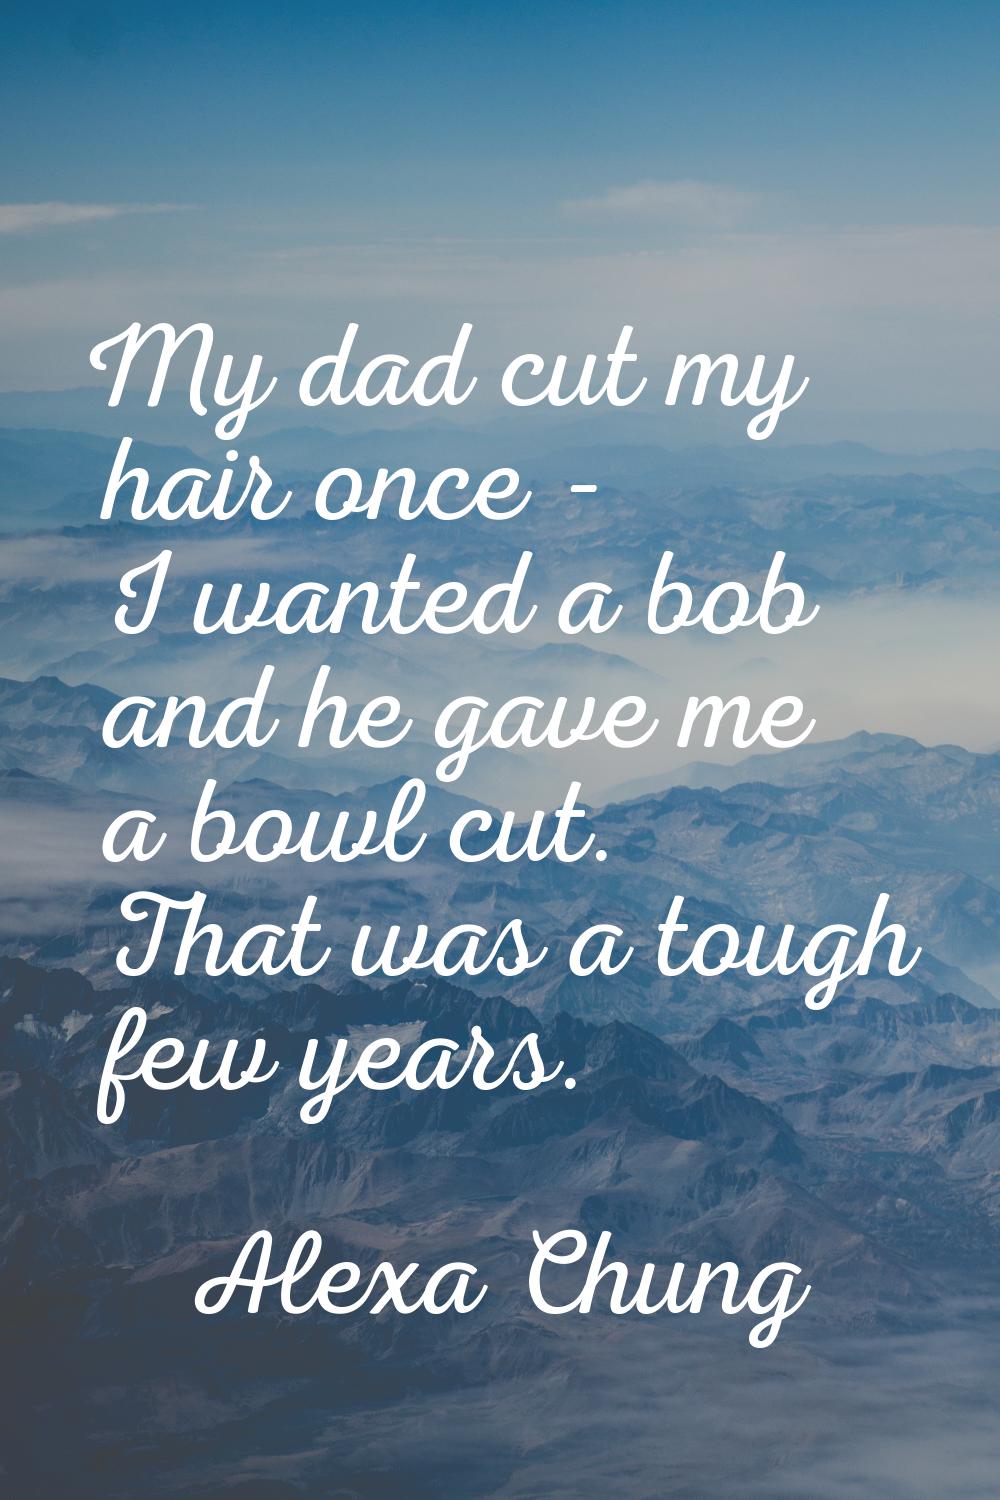 My dad cut my hair once - I wanted a bob and he gave me a bowl cut. That was a tough few years.